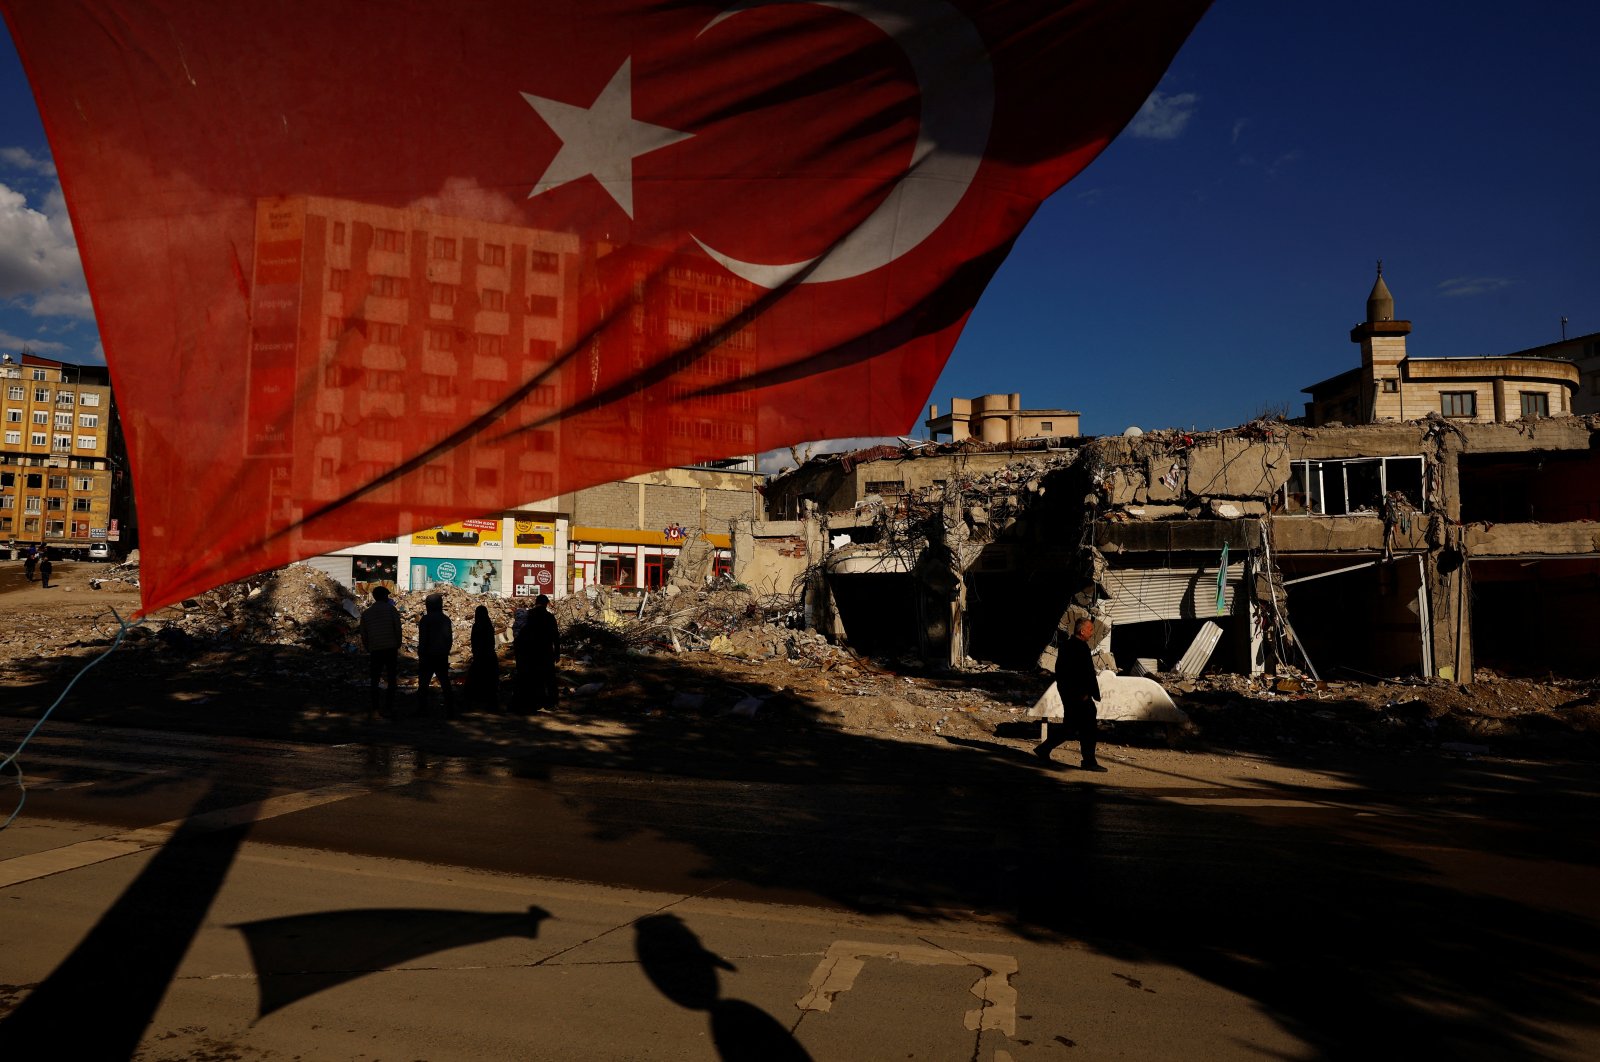 A Turkish flag flies next to damaged buildings in the aftermath of the deadly earthquakes in Kahramanmaraş, Türkiye, March 9, 2023. (Reuters Photo)